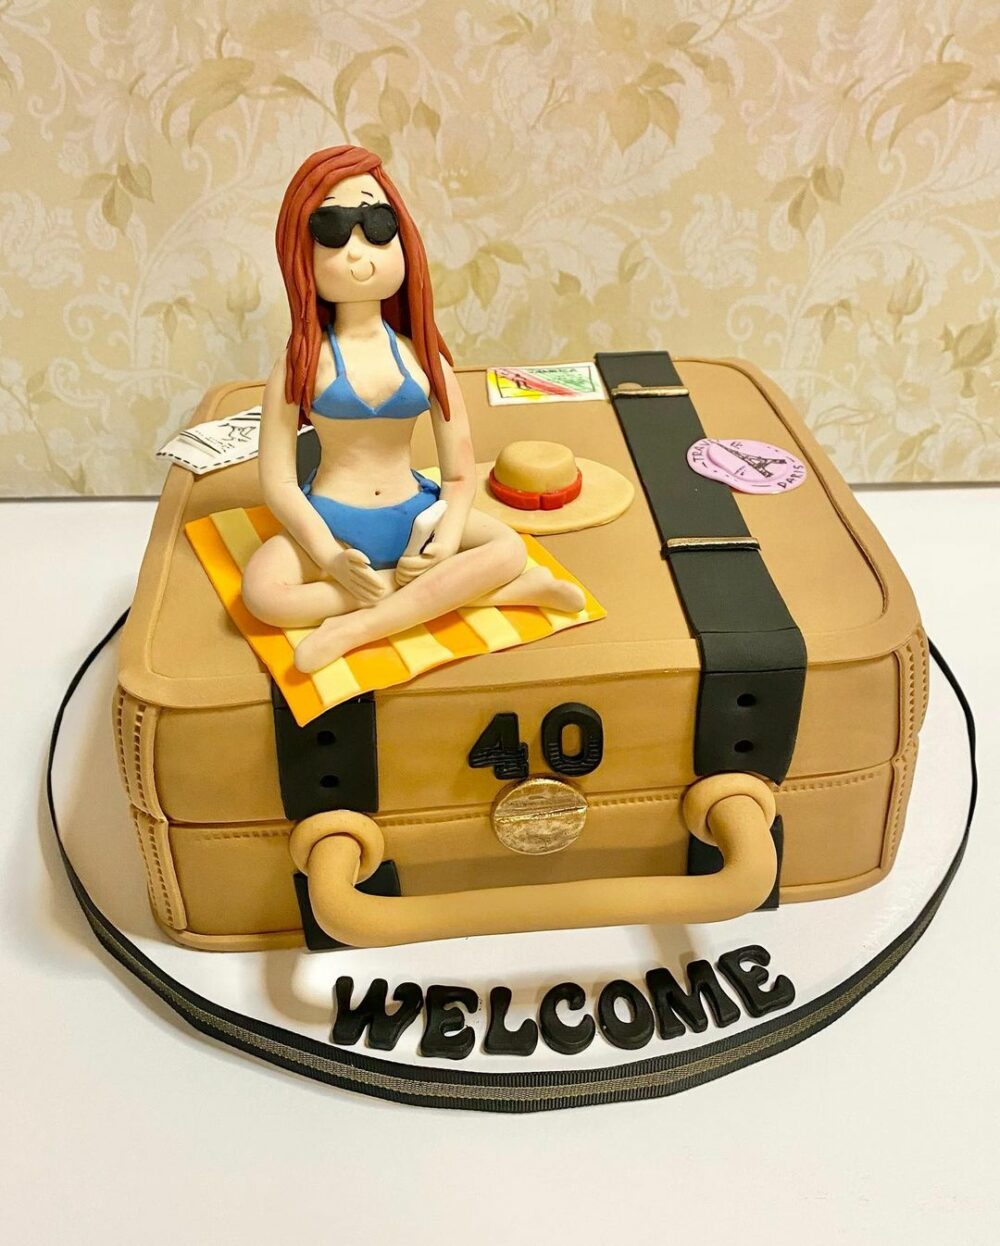 Take this beach babe sitting atop a luggage travel cake with you on your next trip.